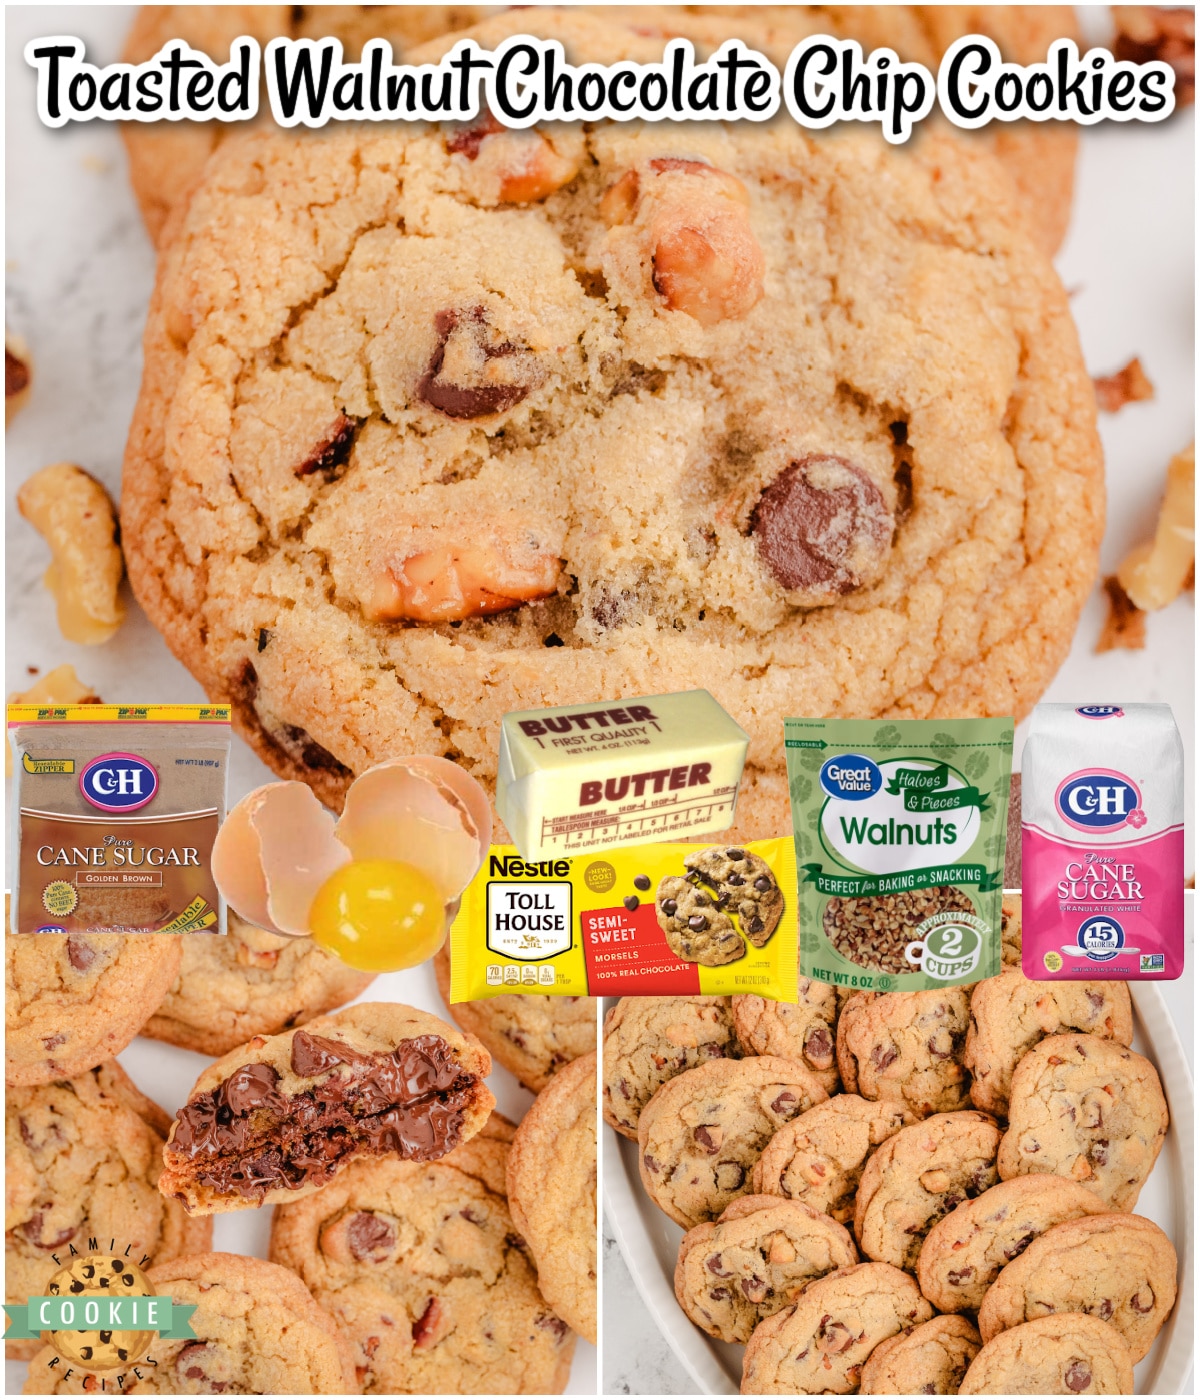 Classic Chocolate Chip Cookies get a flavorful twist with the addition of toasted walnuts! Delightful cookies with incredible flavor! 